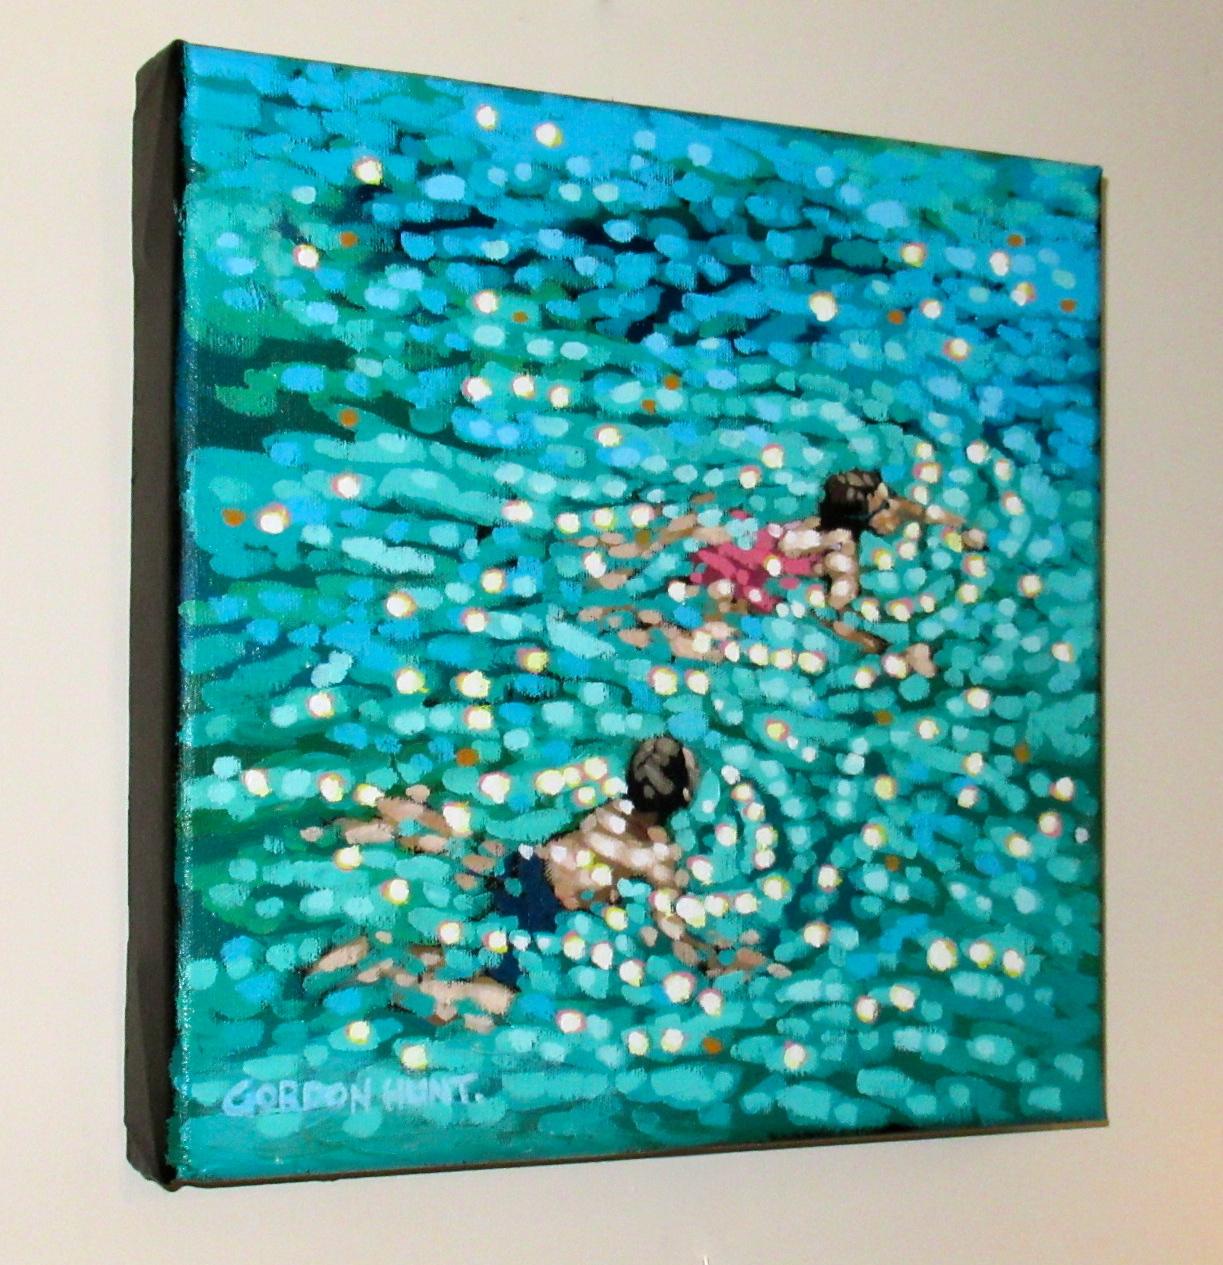 Gordon Hunt
Just Swim
Original Seaside Painting
Oil Paint on Canvas
Canvas Size: 30 cm x 30 cm x 4 cm
Sold Unframed
Please note that in situ images are purely an indication of how a piece may look.

Just Swim is an original seascape painting by